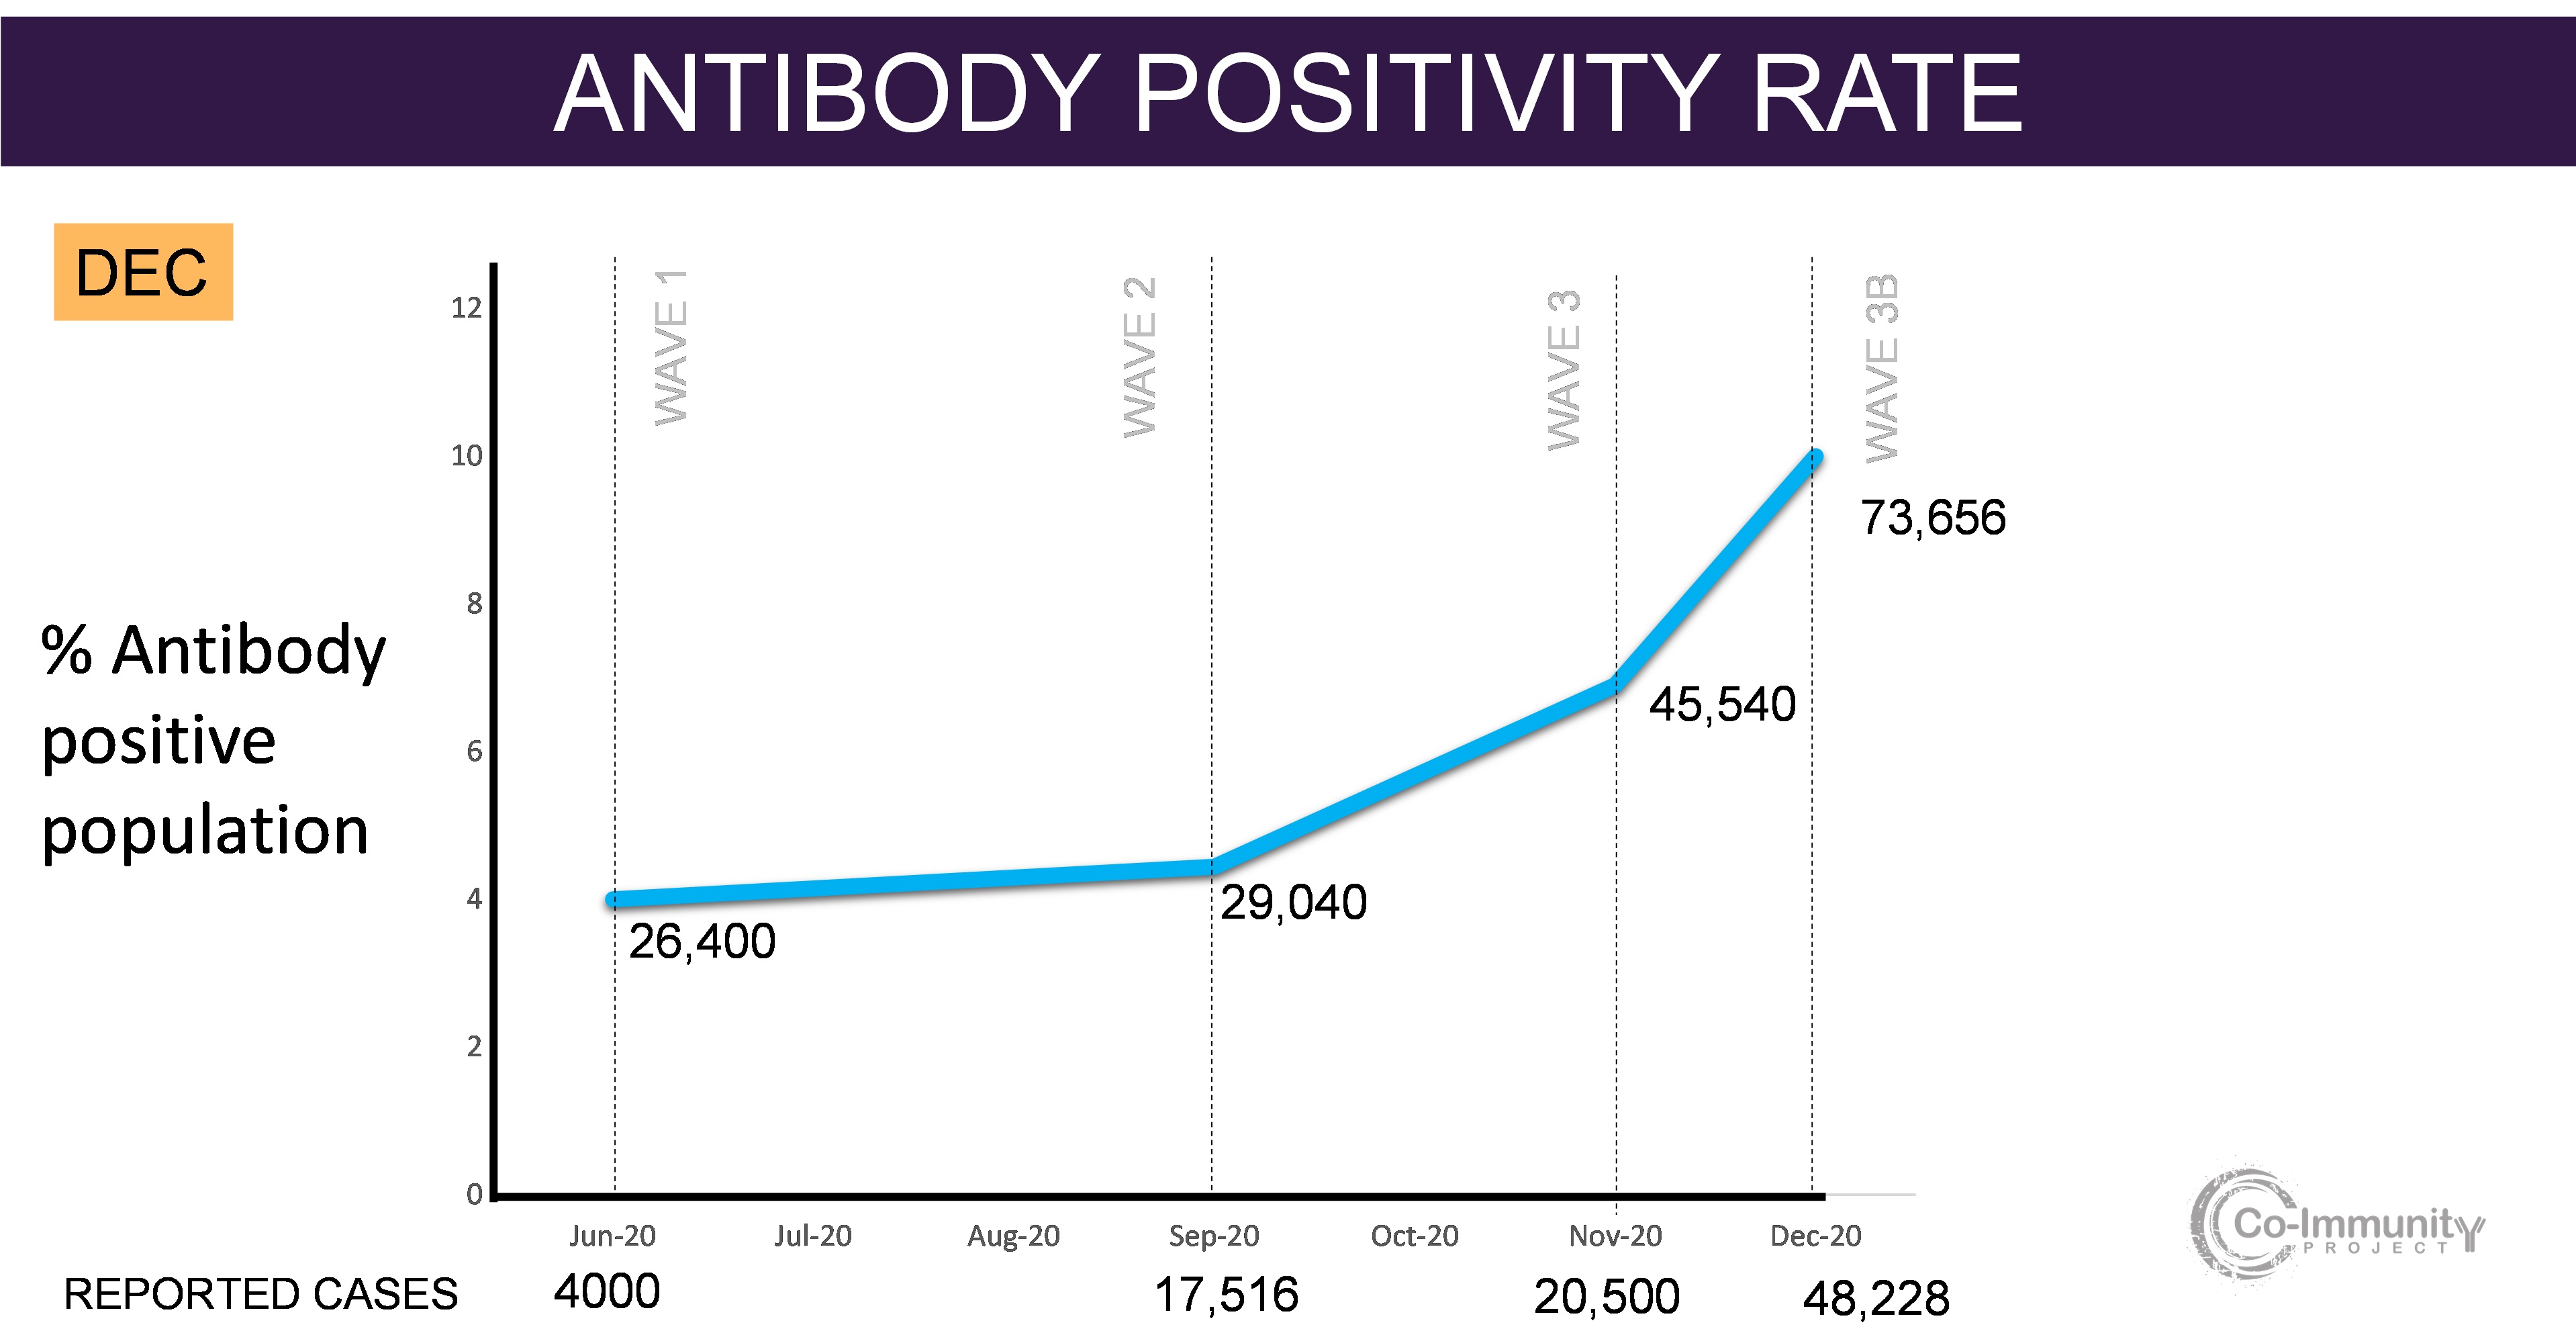 Estimated number of individuals in Jefferson County who have antibodies to SARS-CoV-2, indicating a previous infection, based on testing in South Louisville by the Co-Immunity Project, compared with community-wide testing during previous rounds (waves).